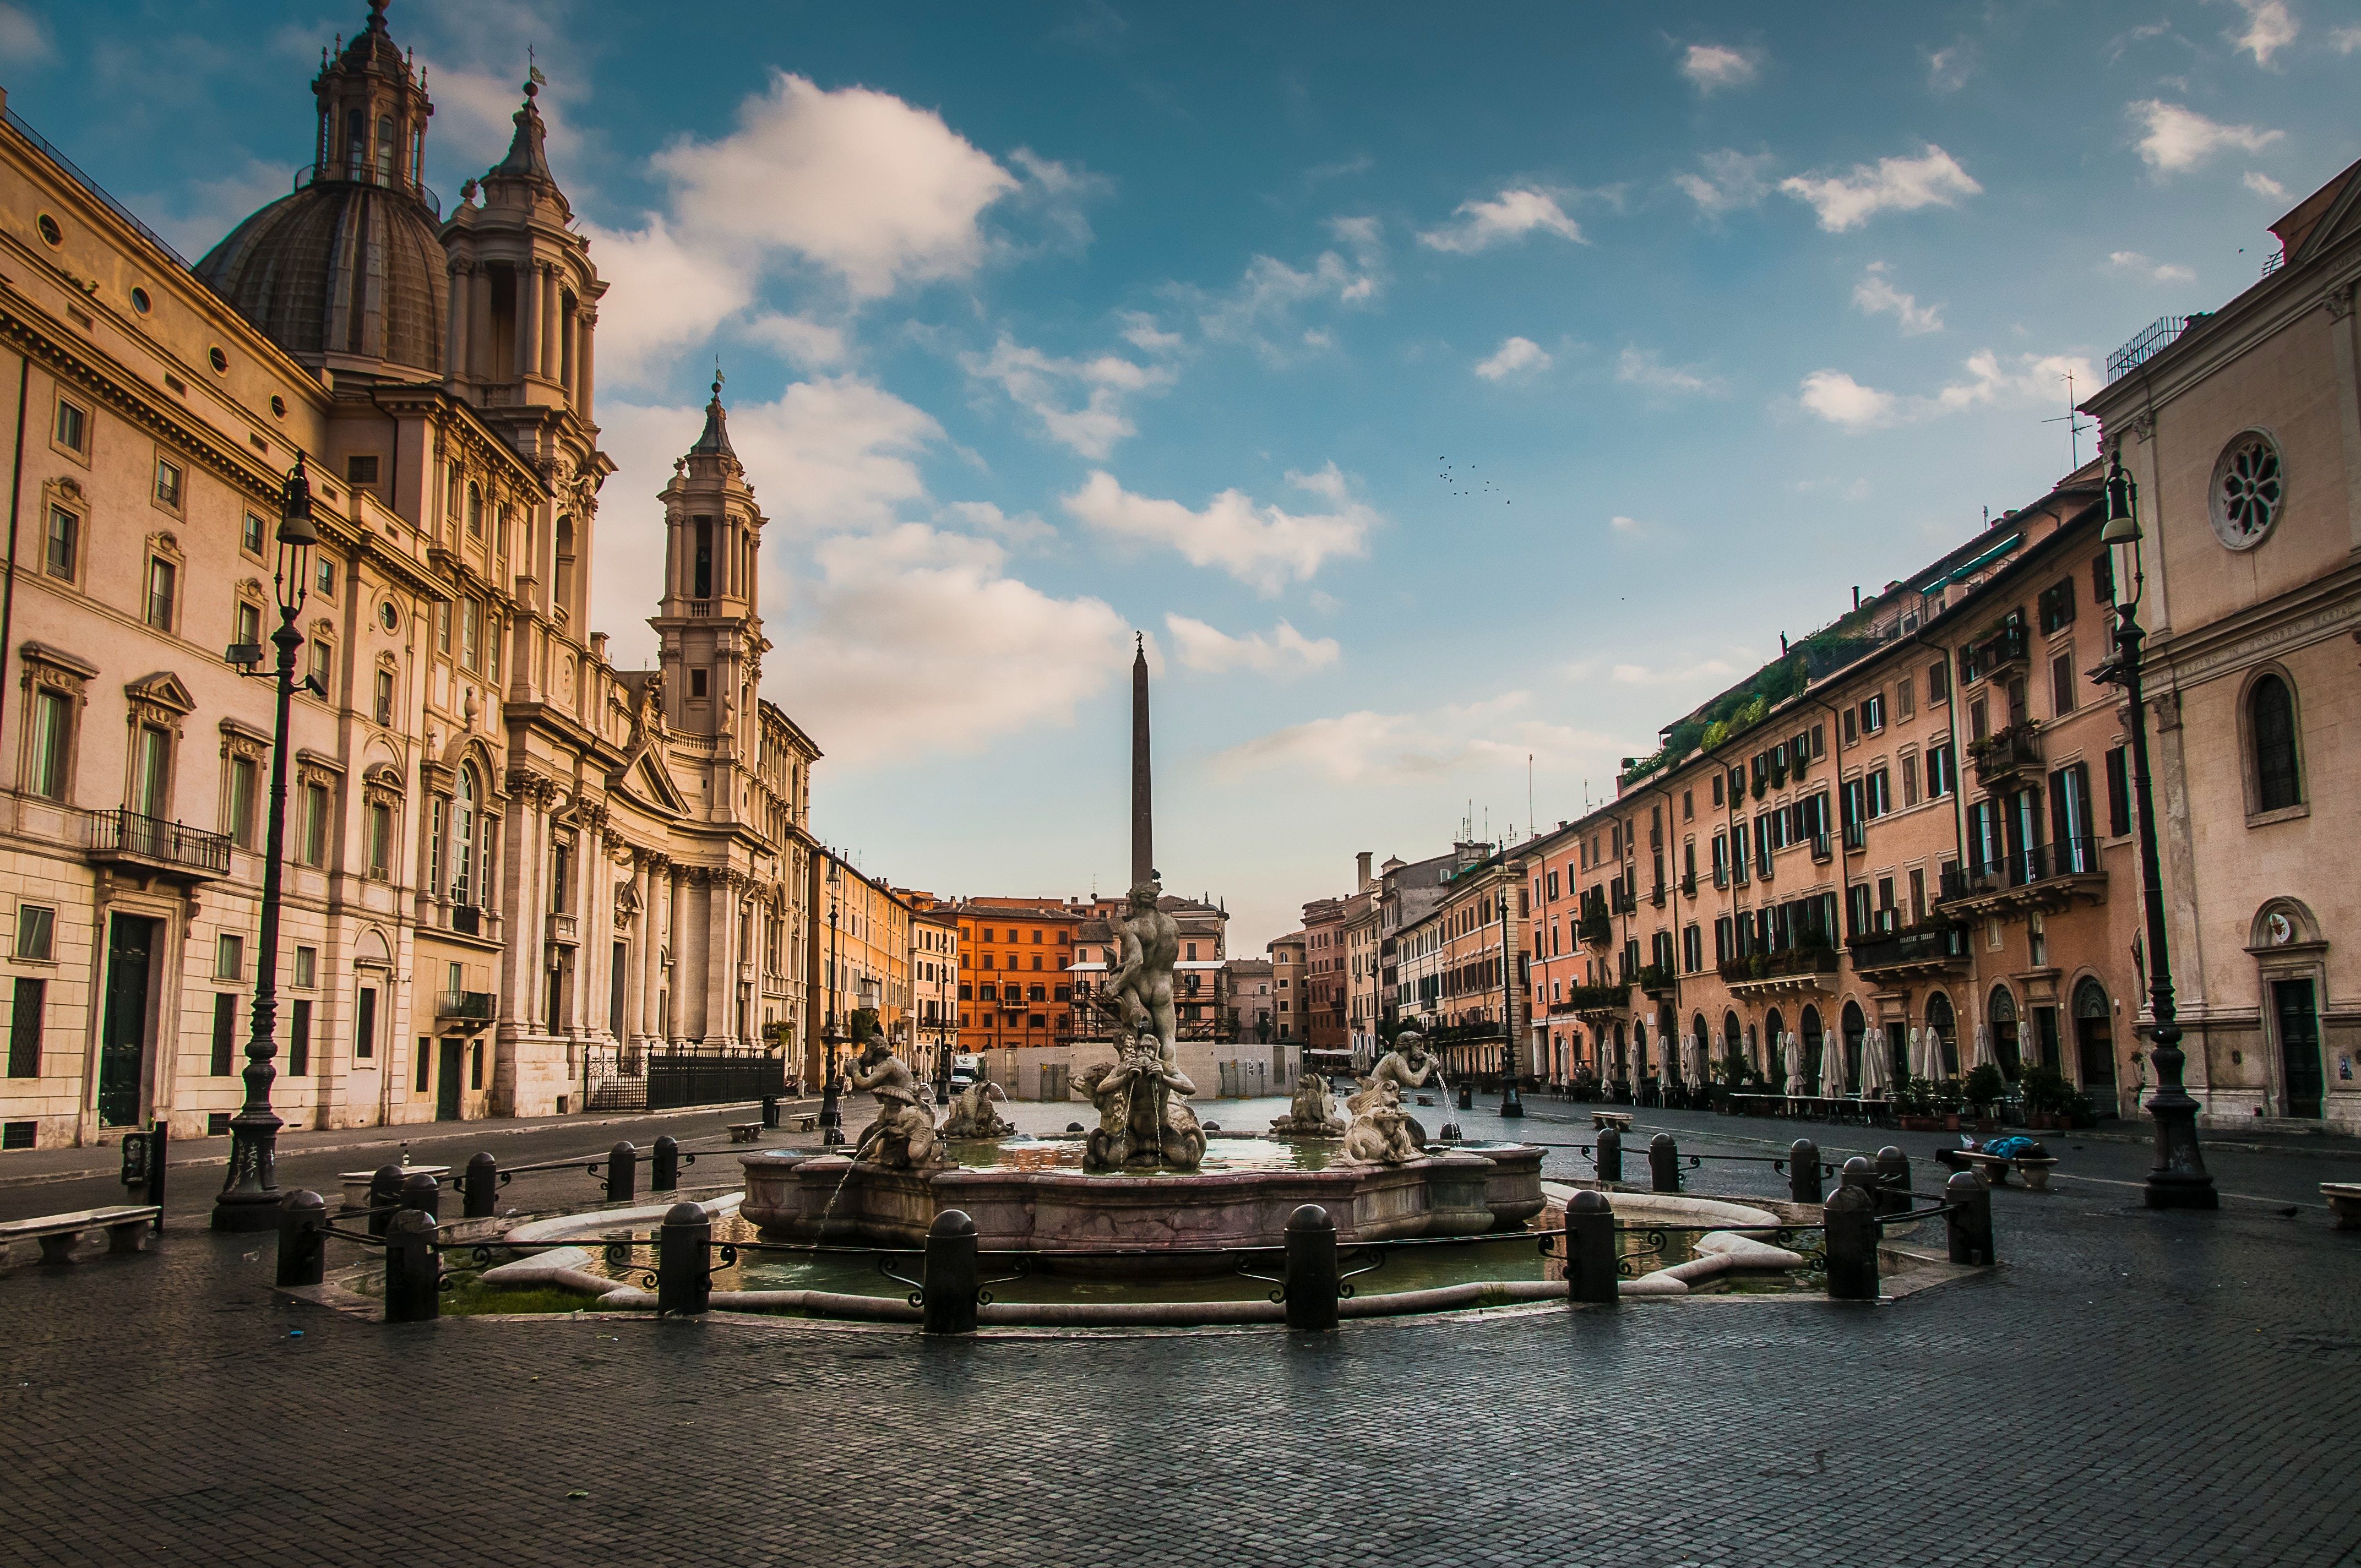 A fountain in the heart of Piazza Navona, Rome, Italy